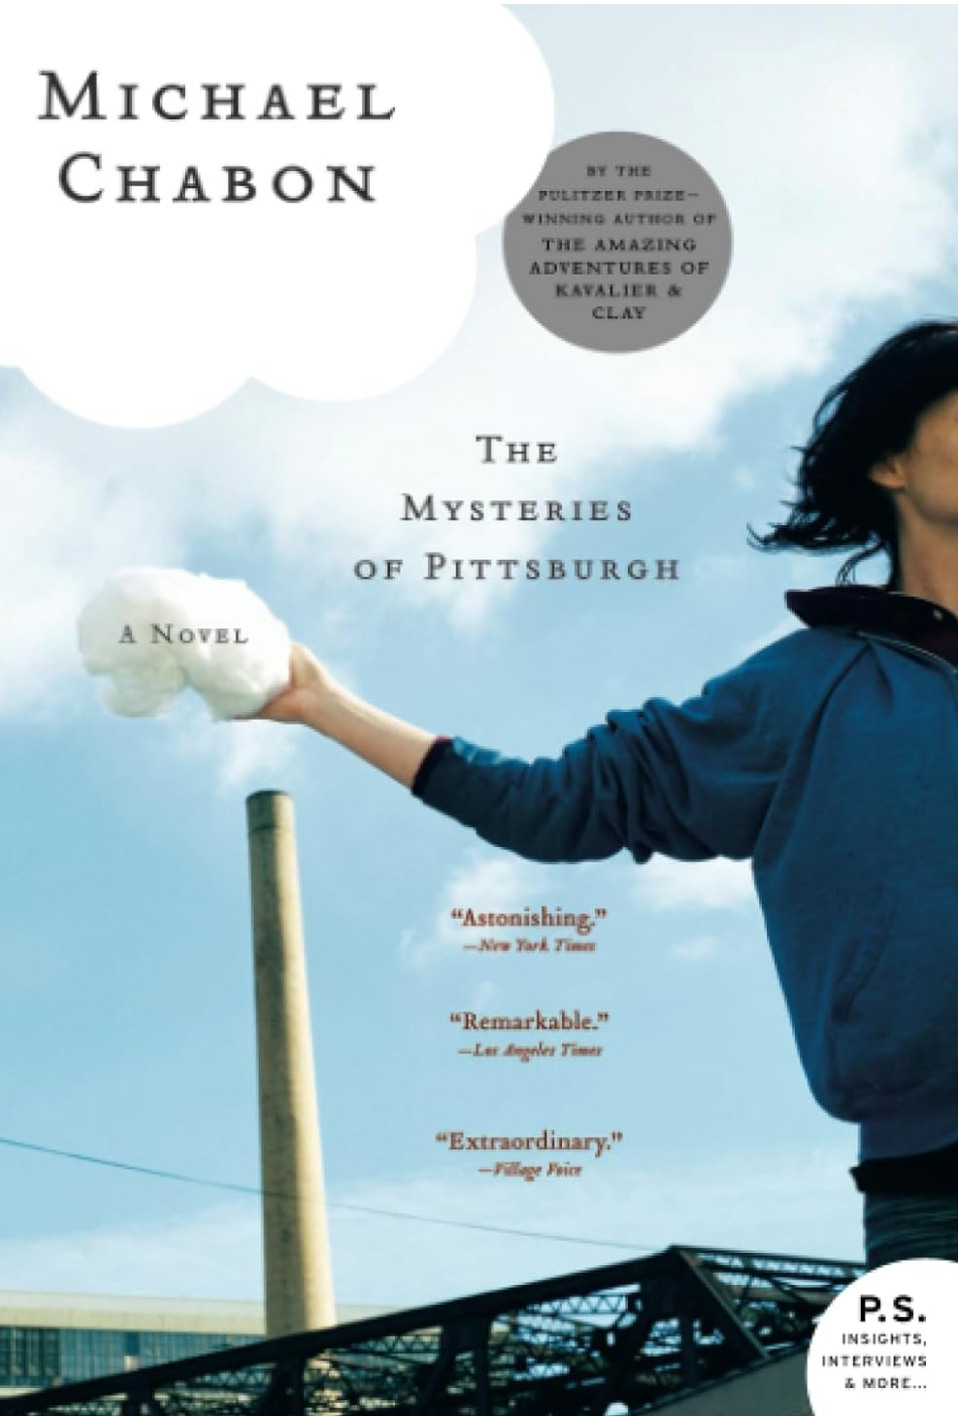 Book cover: "The Mysteries of Pittsburgh."